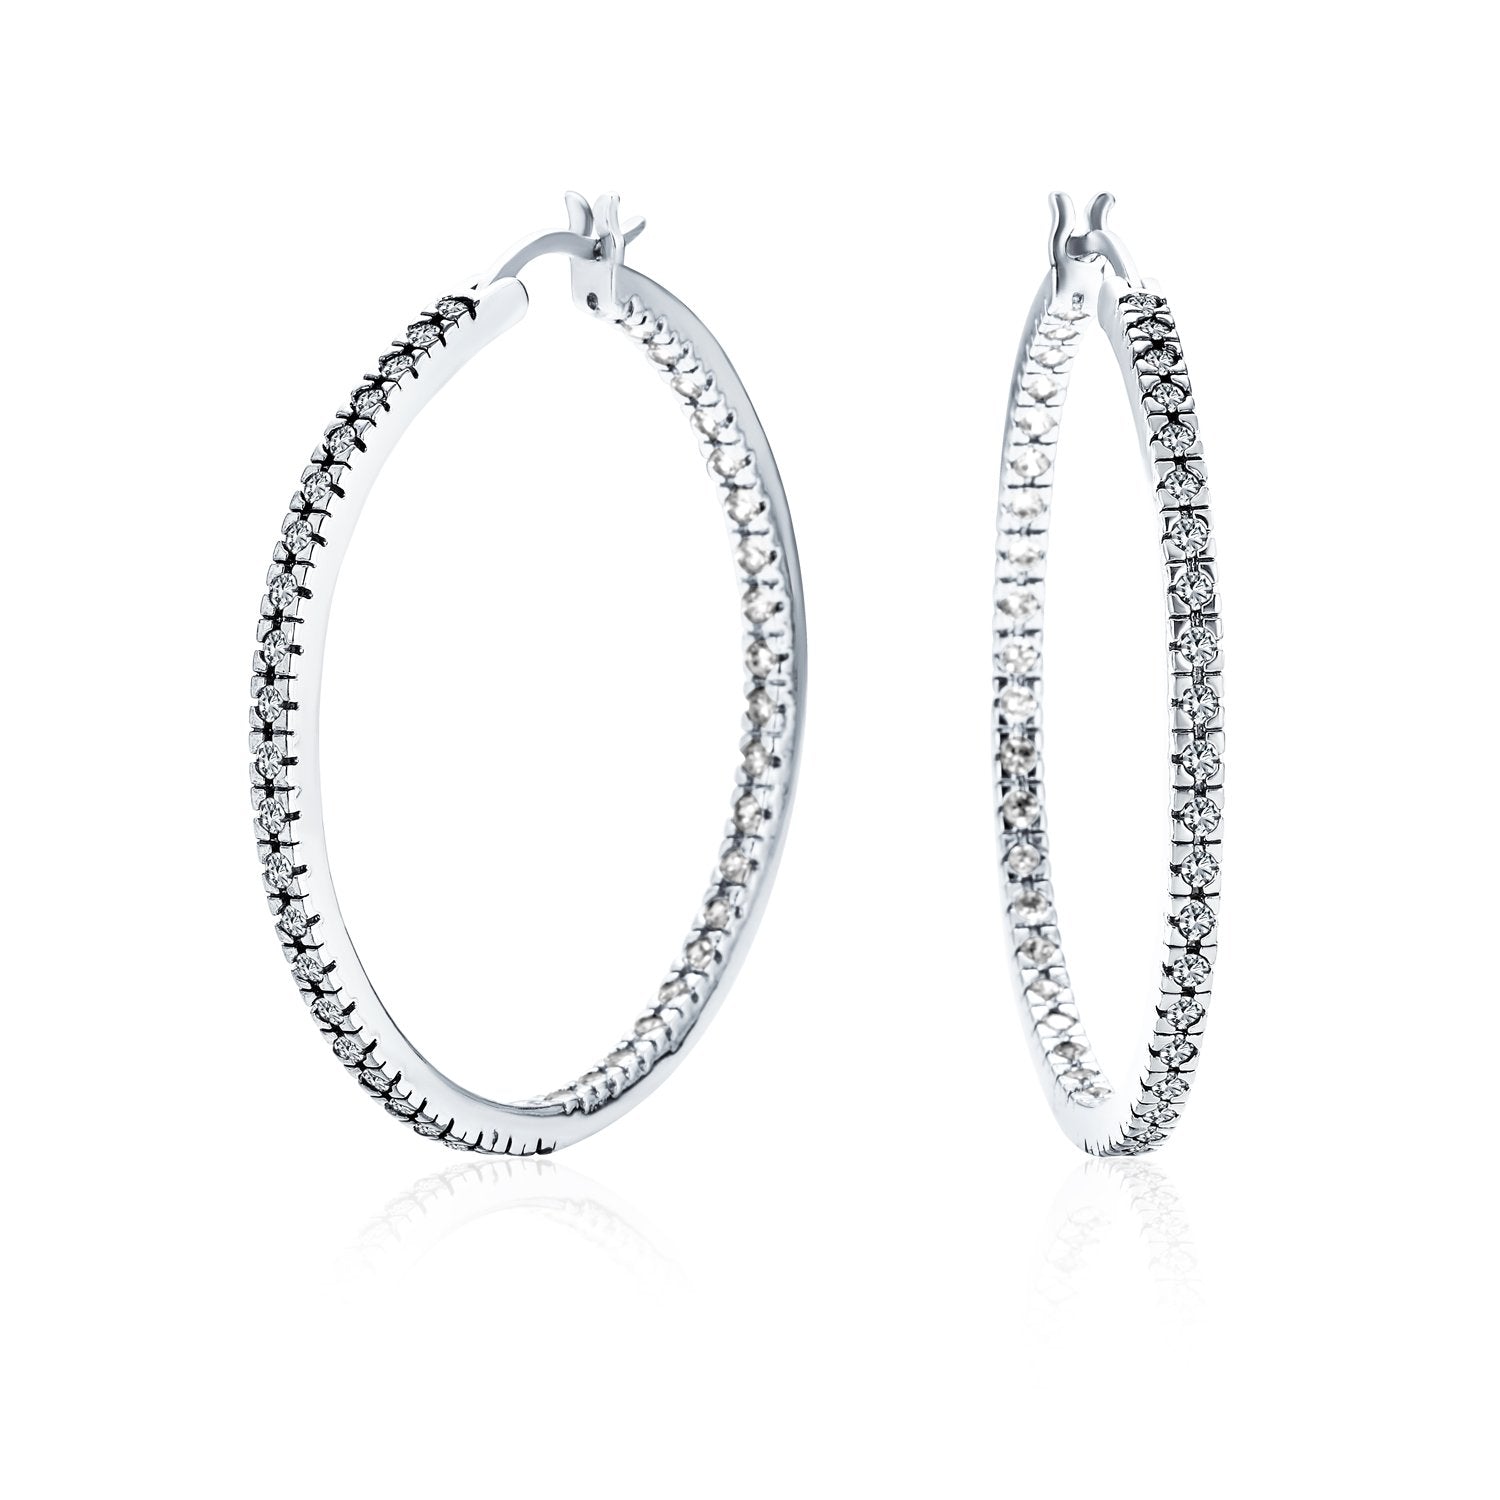 White Cubic Zirconia Pave Inside Out Hoop Earrings Prom Silver Plated - Joyeria Lady